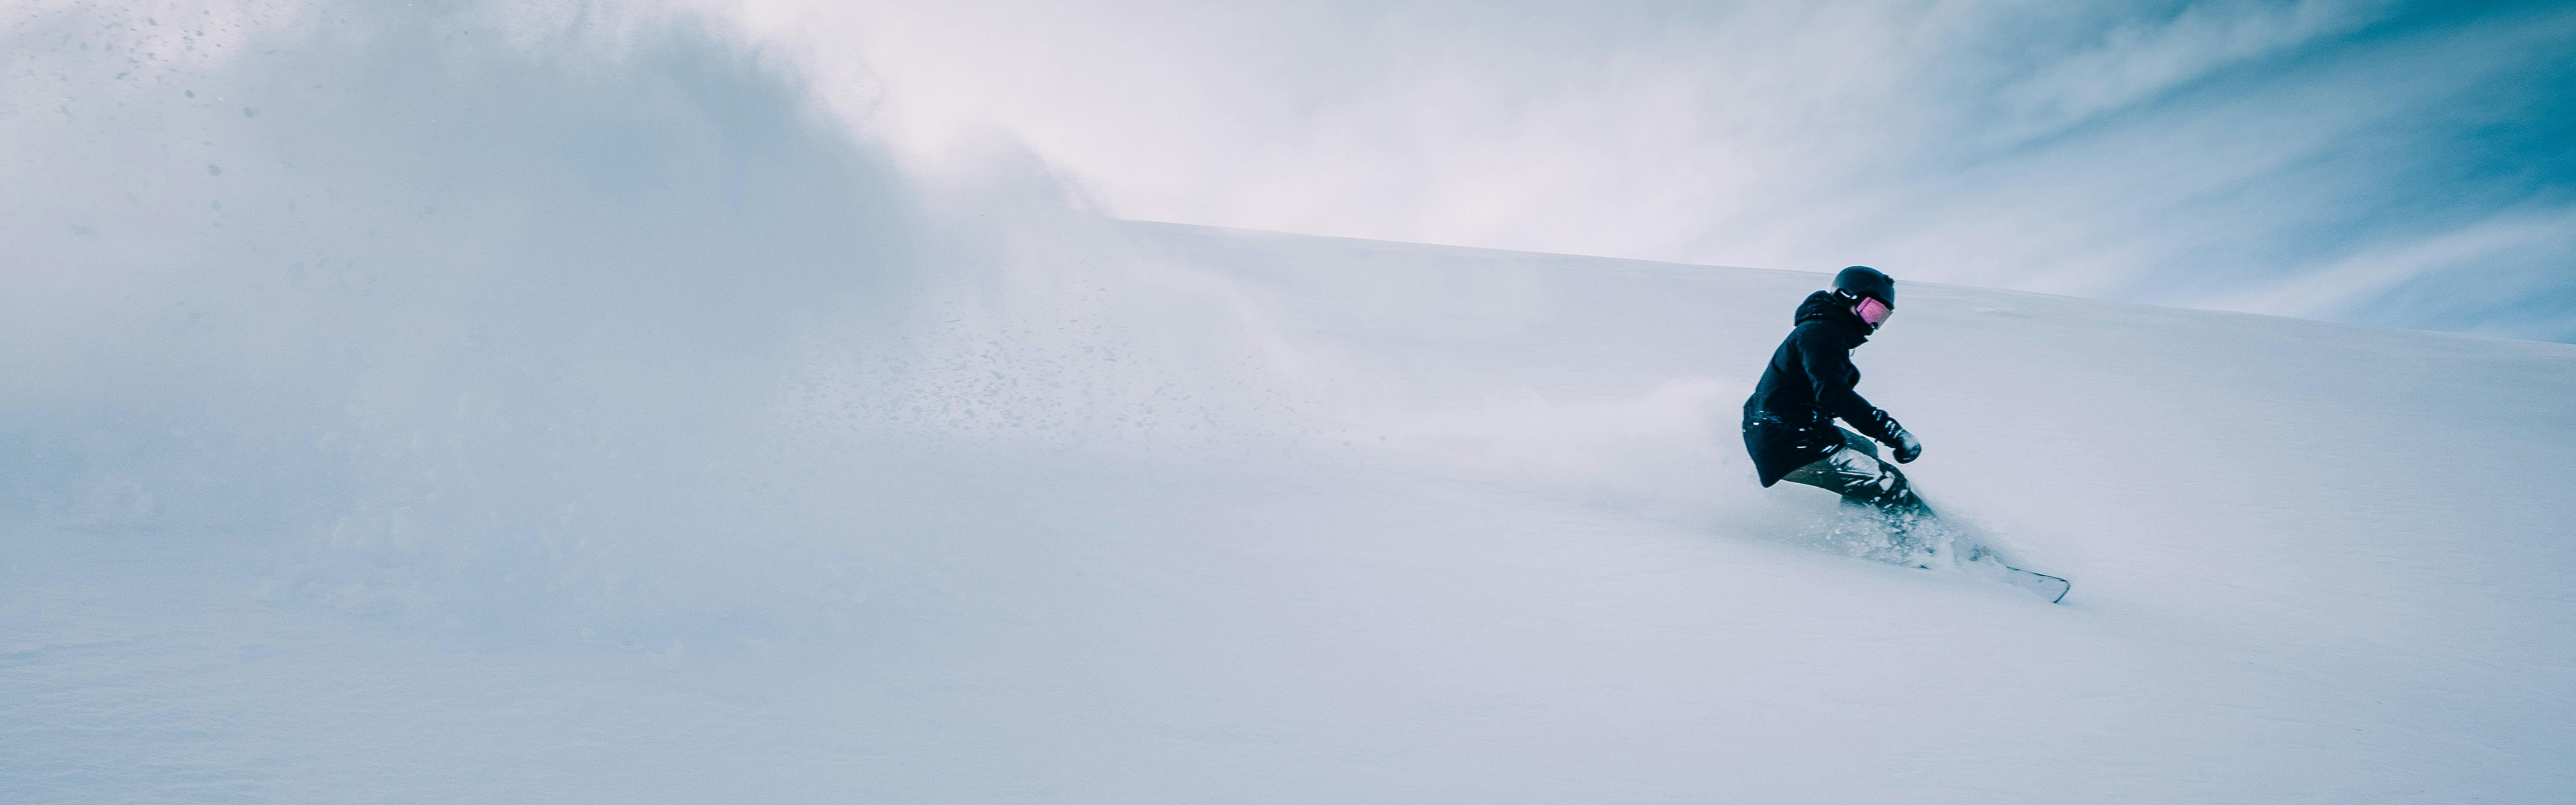 A snowboarder kicks up a cloud of powder as they turn